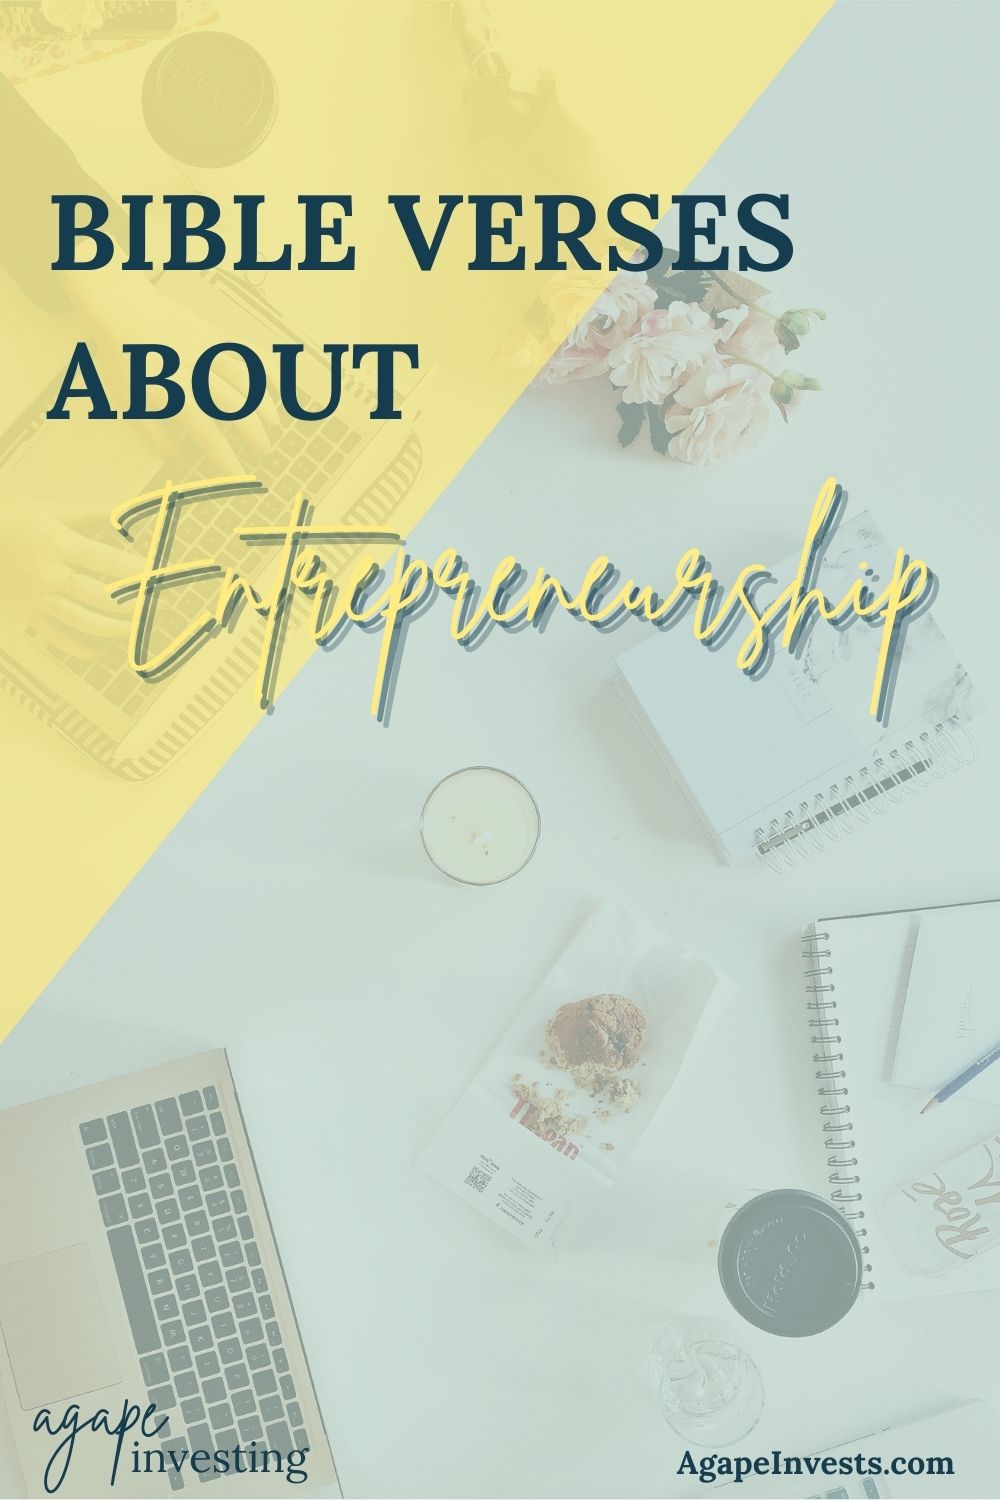 Let’s look at what the Bible has to say about entrepreneurship. We will look at 7 bible verses about entrepreneurship.